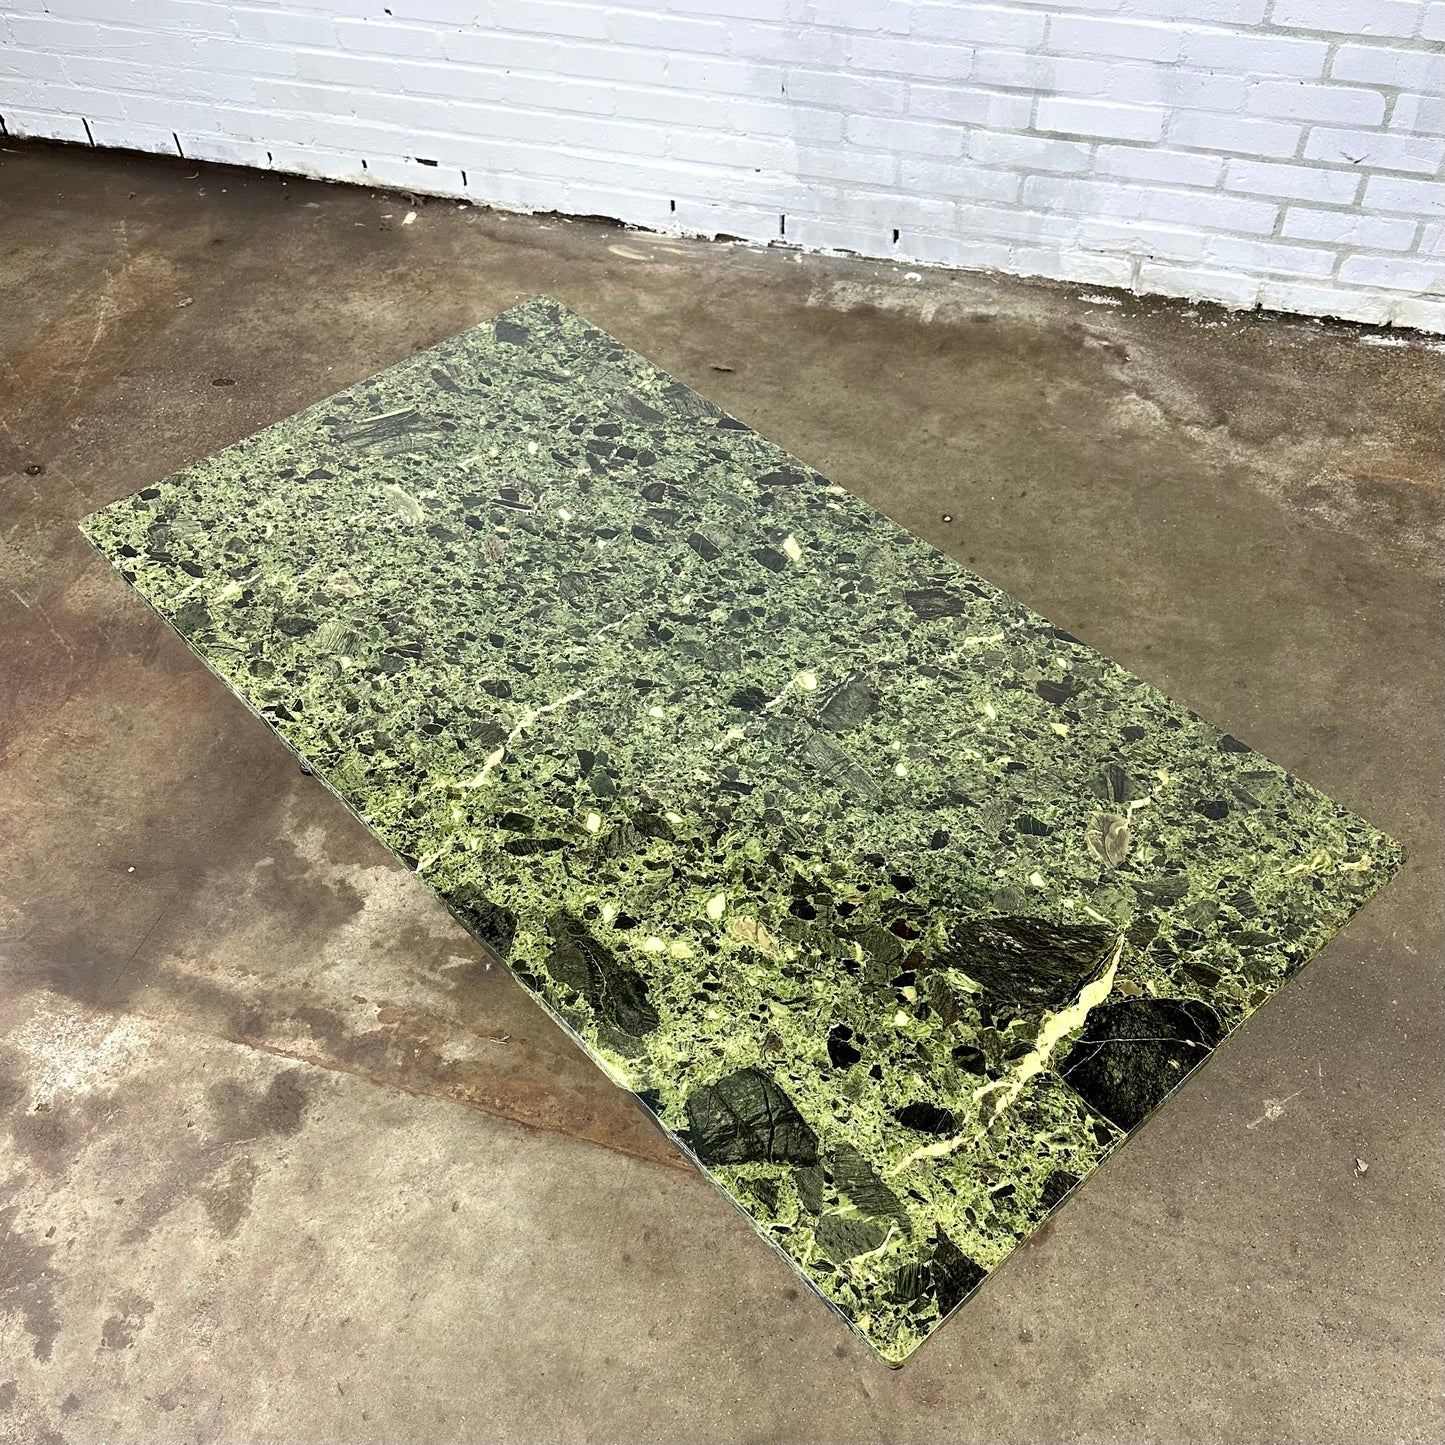 Marble green coffee table